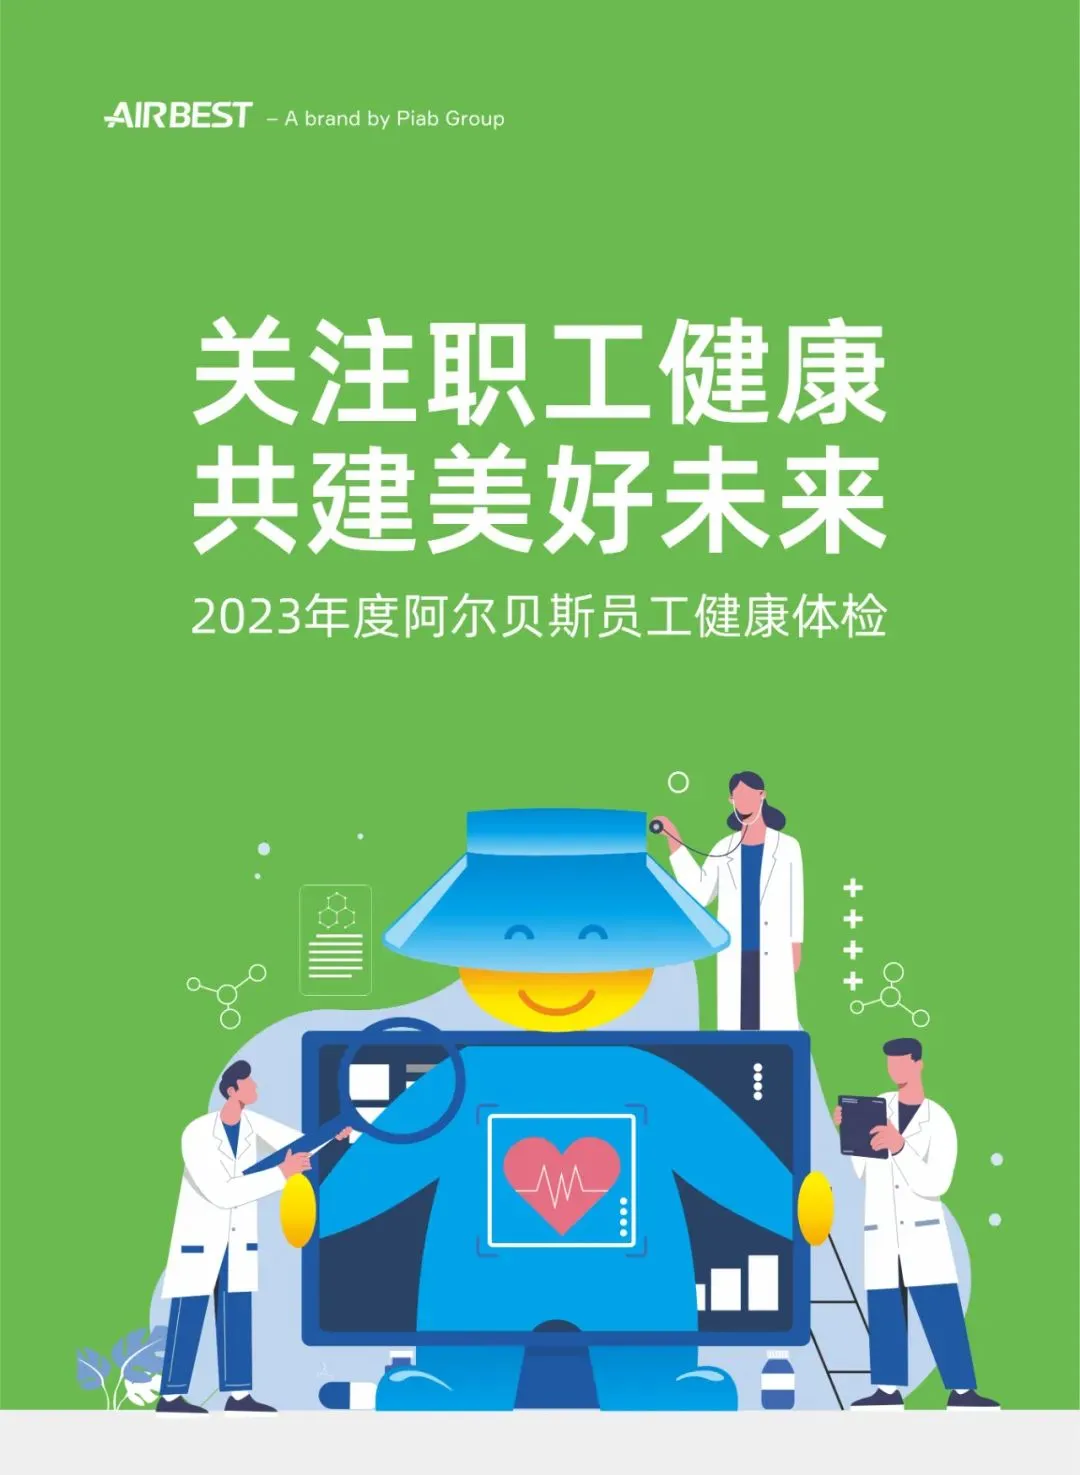 Employee Care - AIRBEST's Annual Employee Health Check-up in 2023